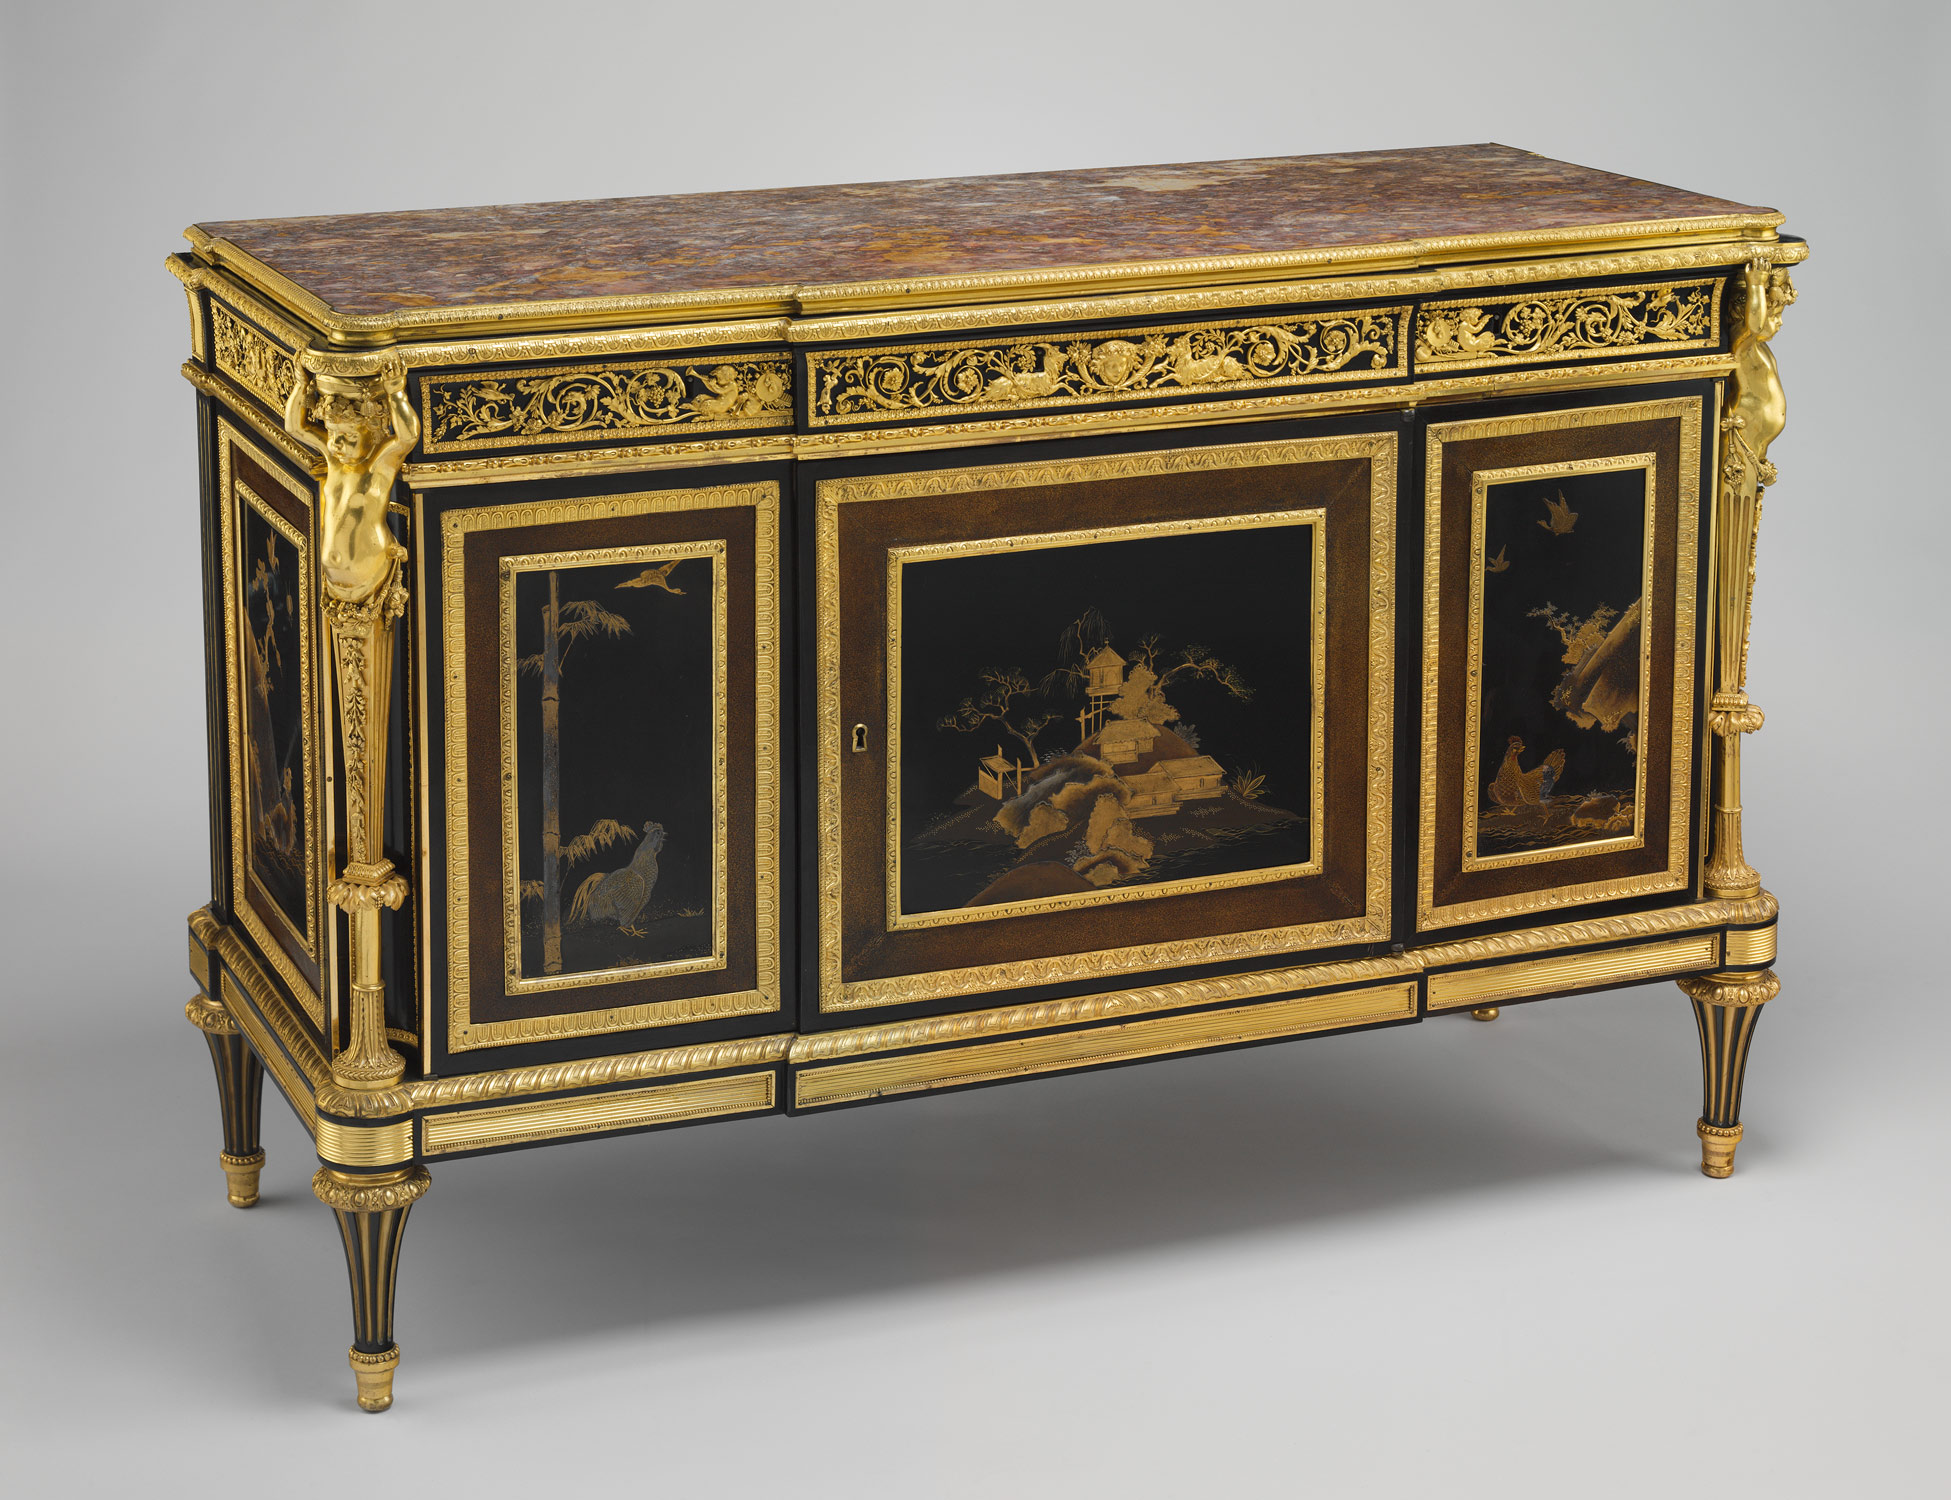 French Furniture In The Eighteenth Century Case Furniture